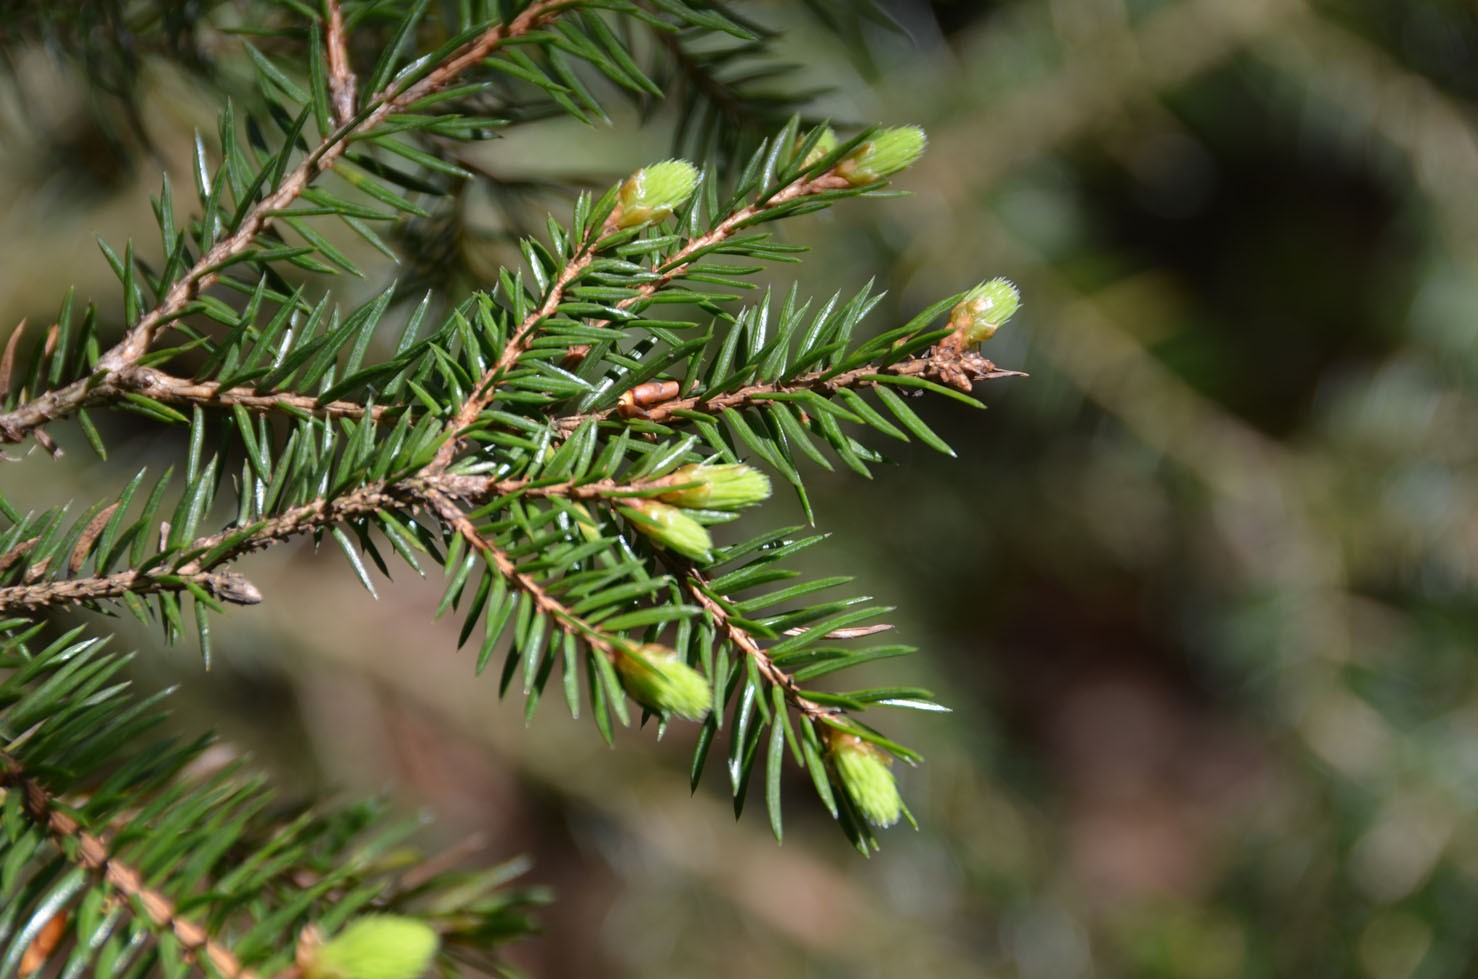 Enlarged view: Picea abies